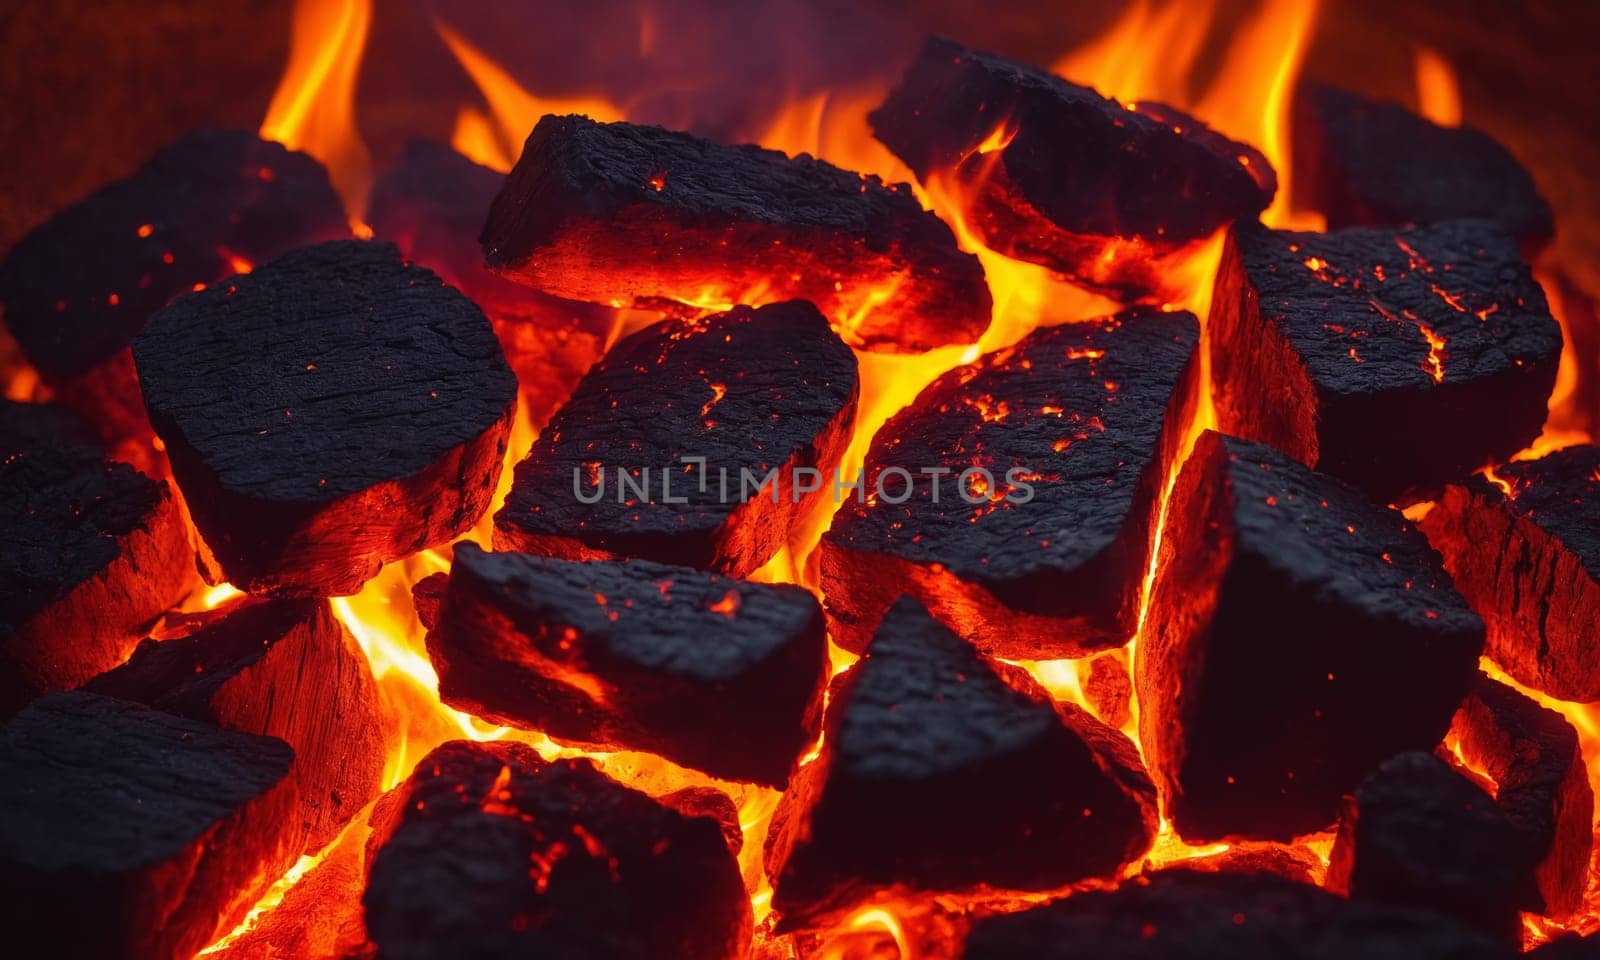 High view of burning coals in the background.